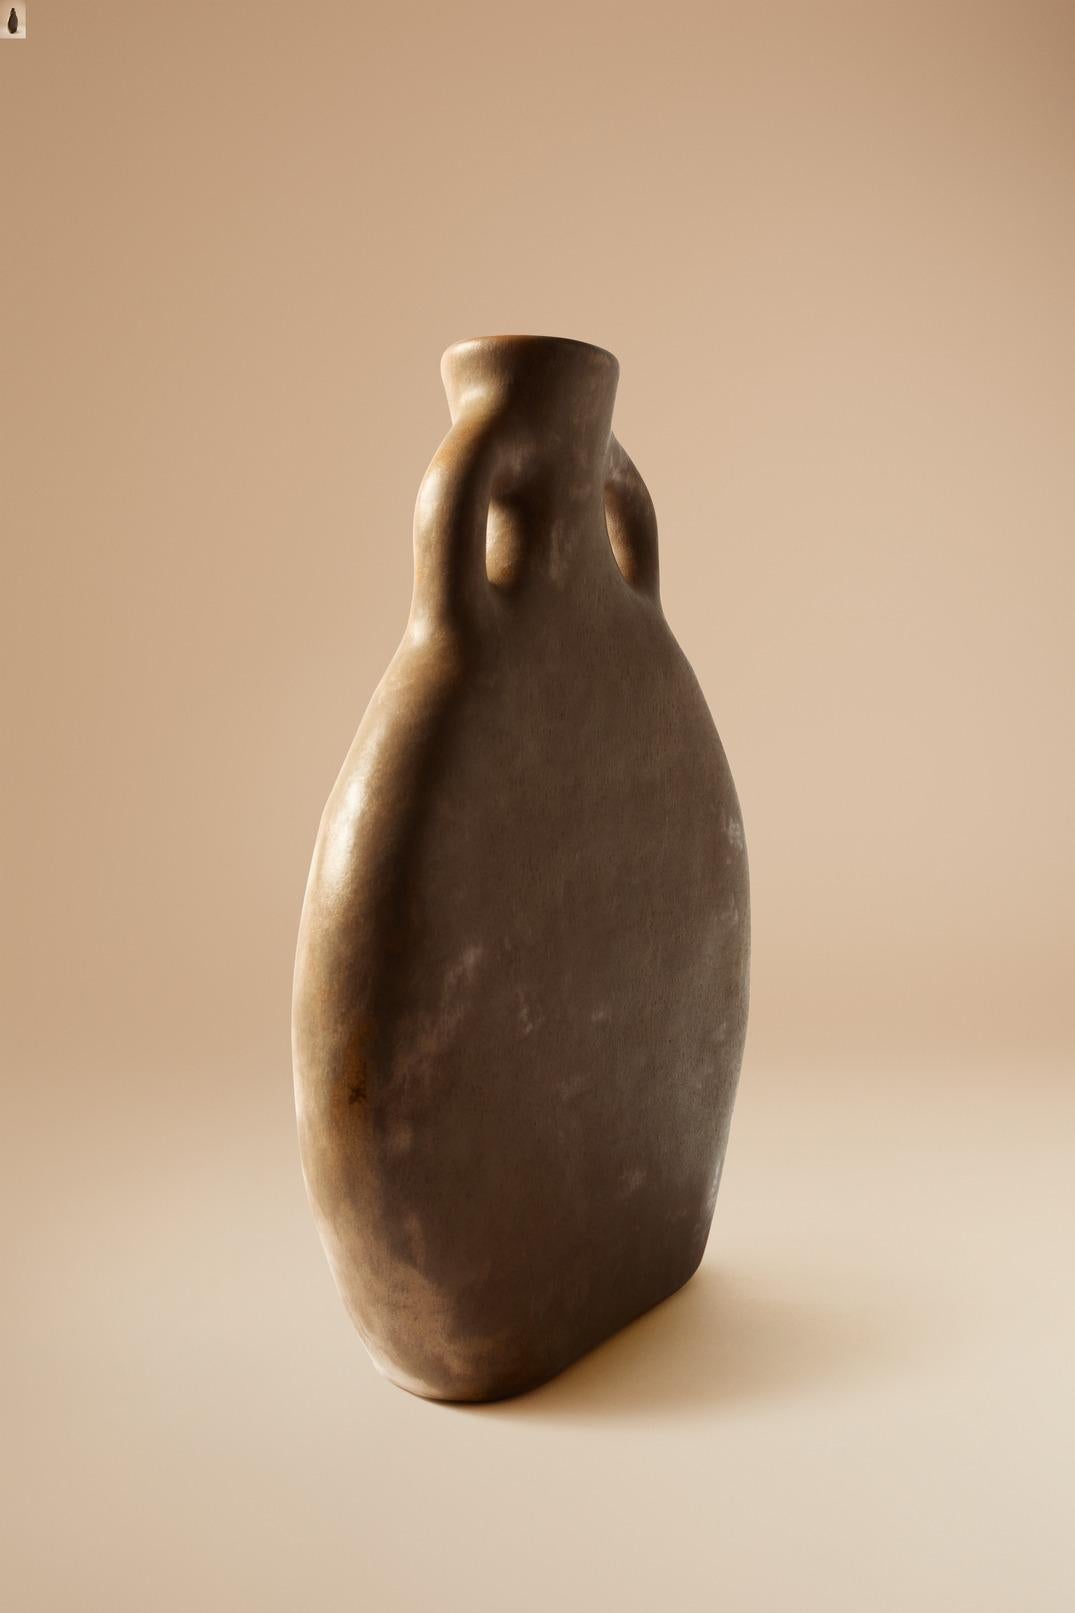 Modern Vessel 03 in Smooth Stoneware Clay. Handmade by Jade Paton for Lemon For Sale